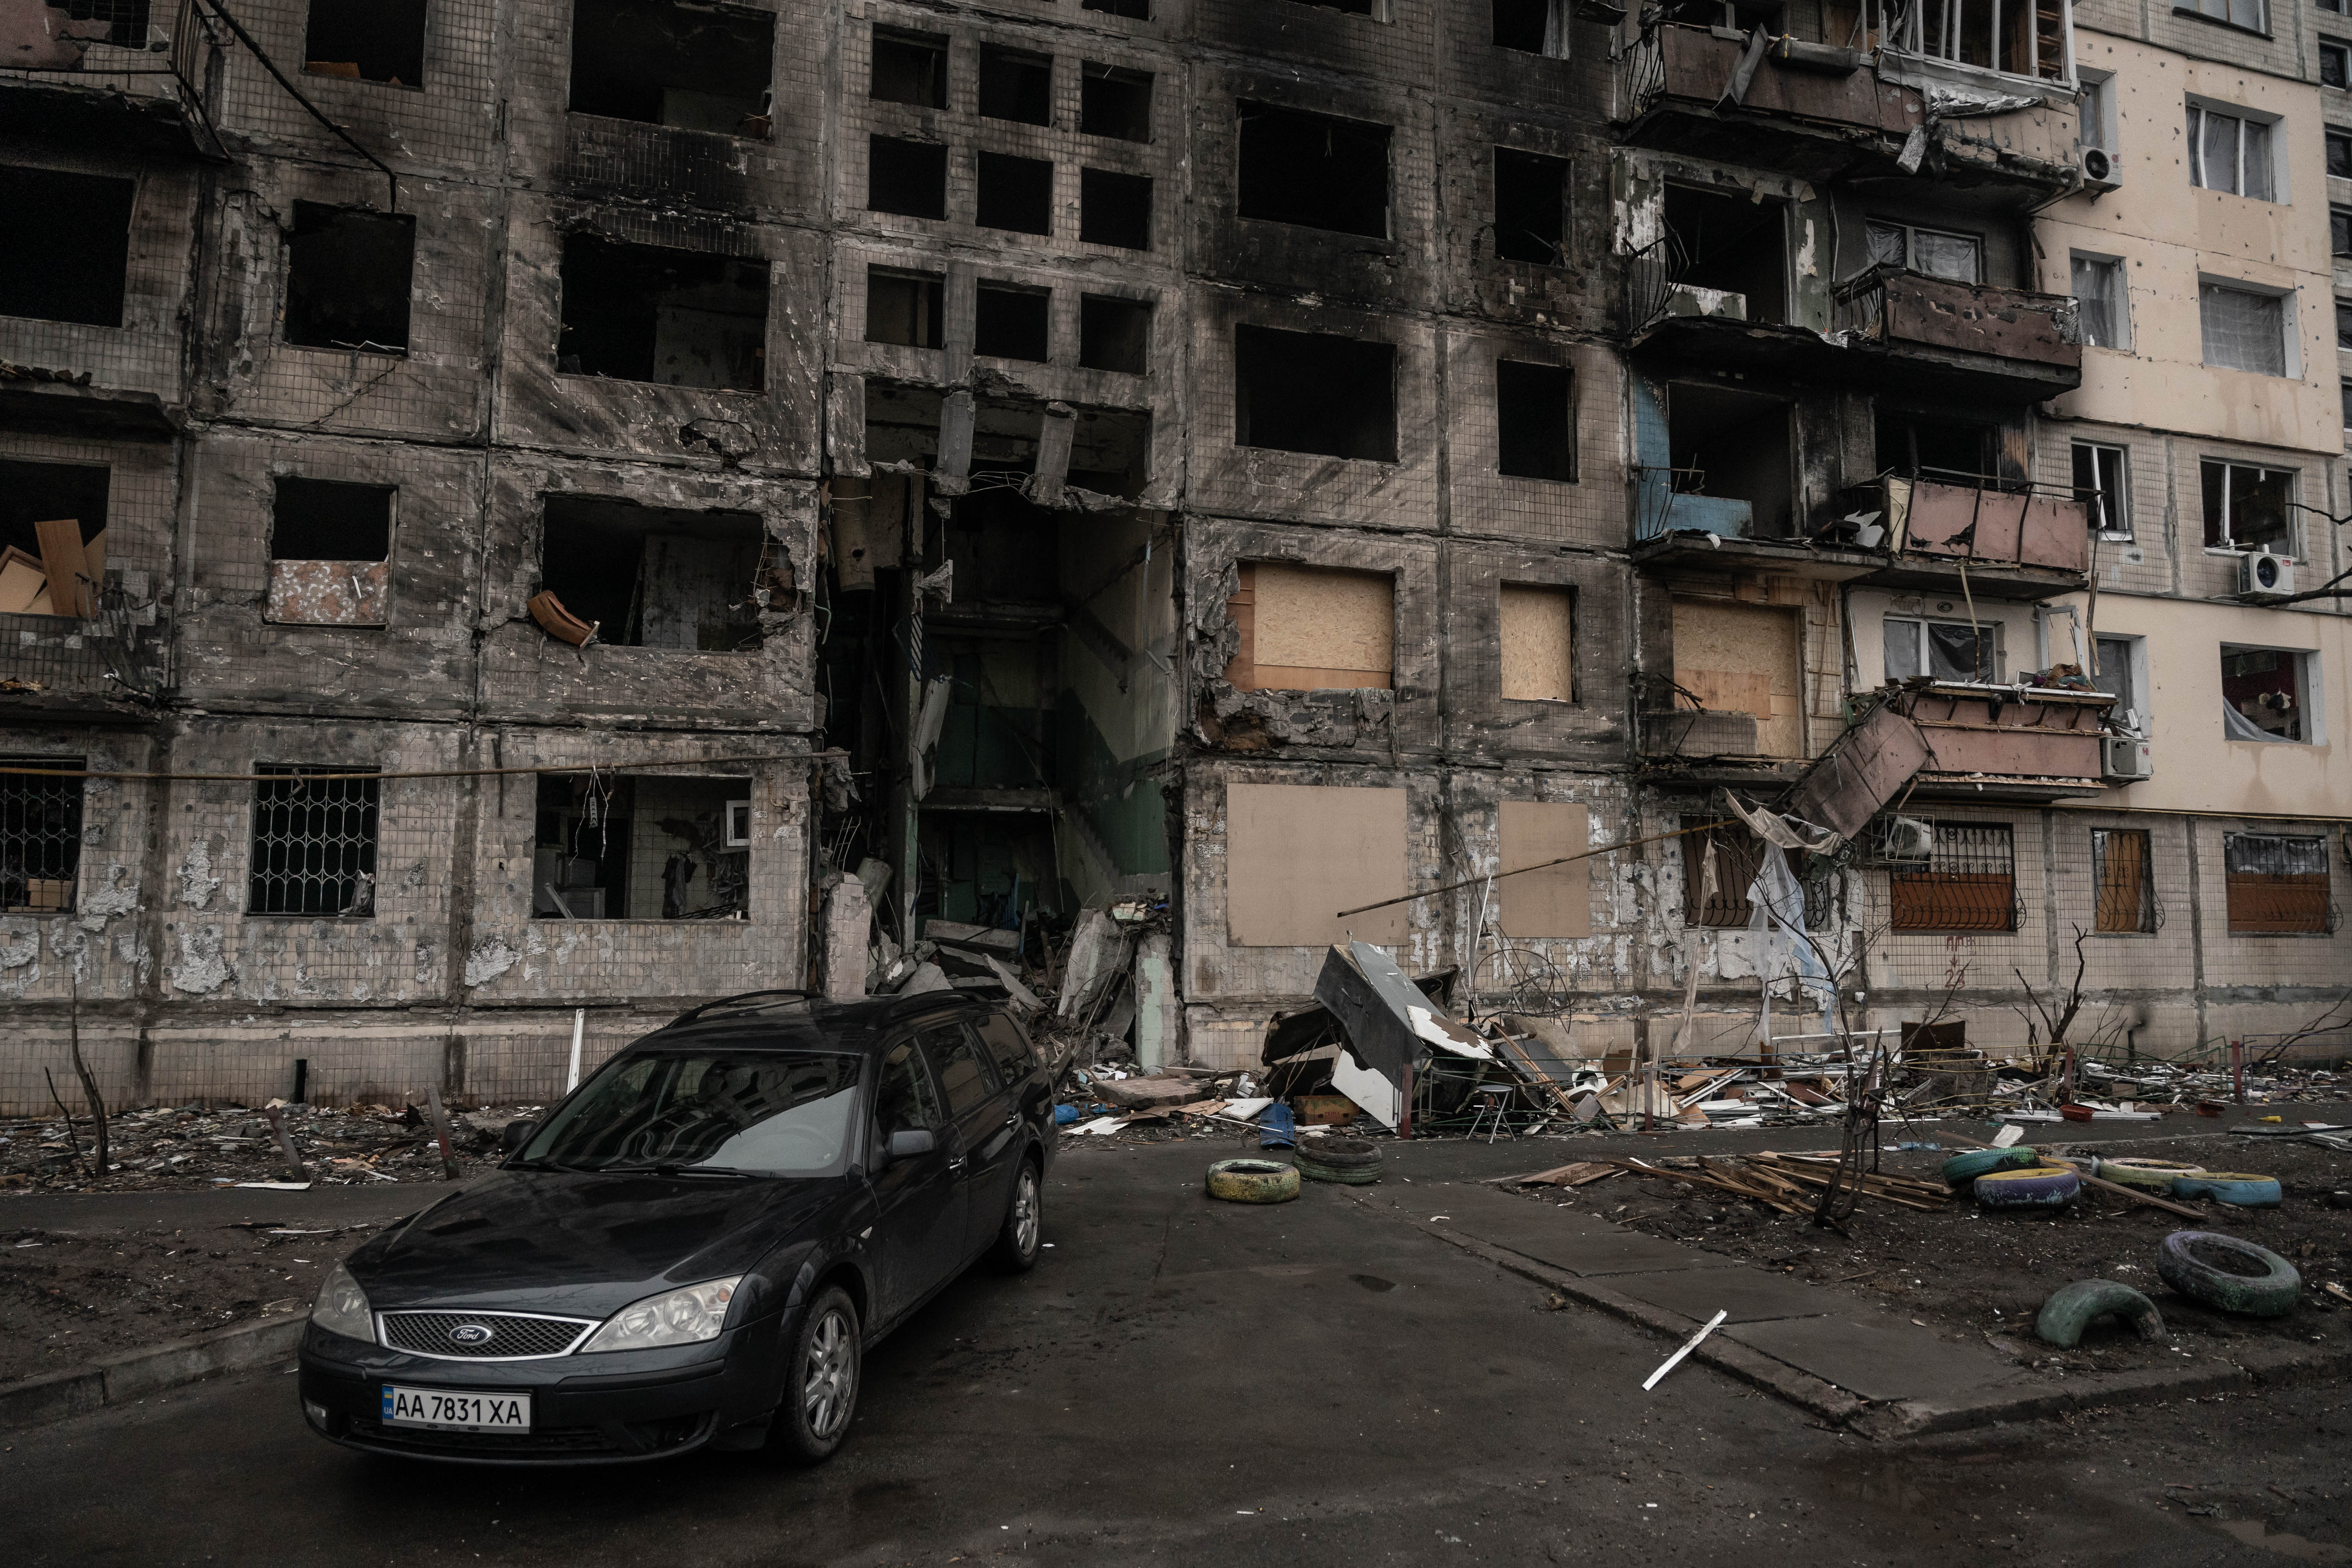 A building in Irbin destroyed by bombs dropped by the Russian Air Force.  (Frank Favasoli)